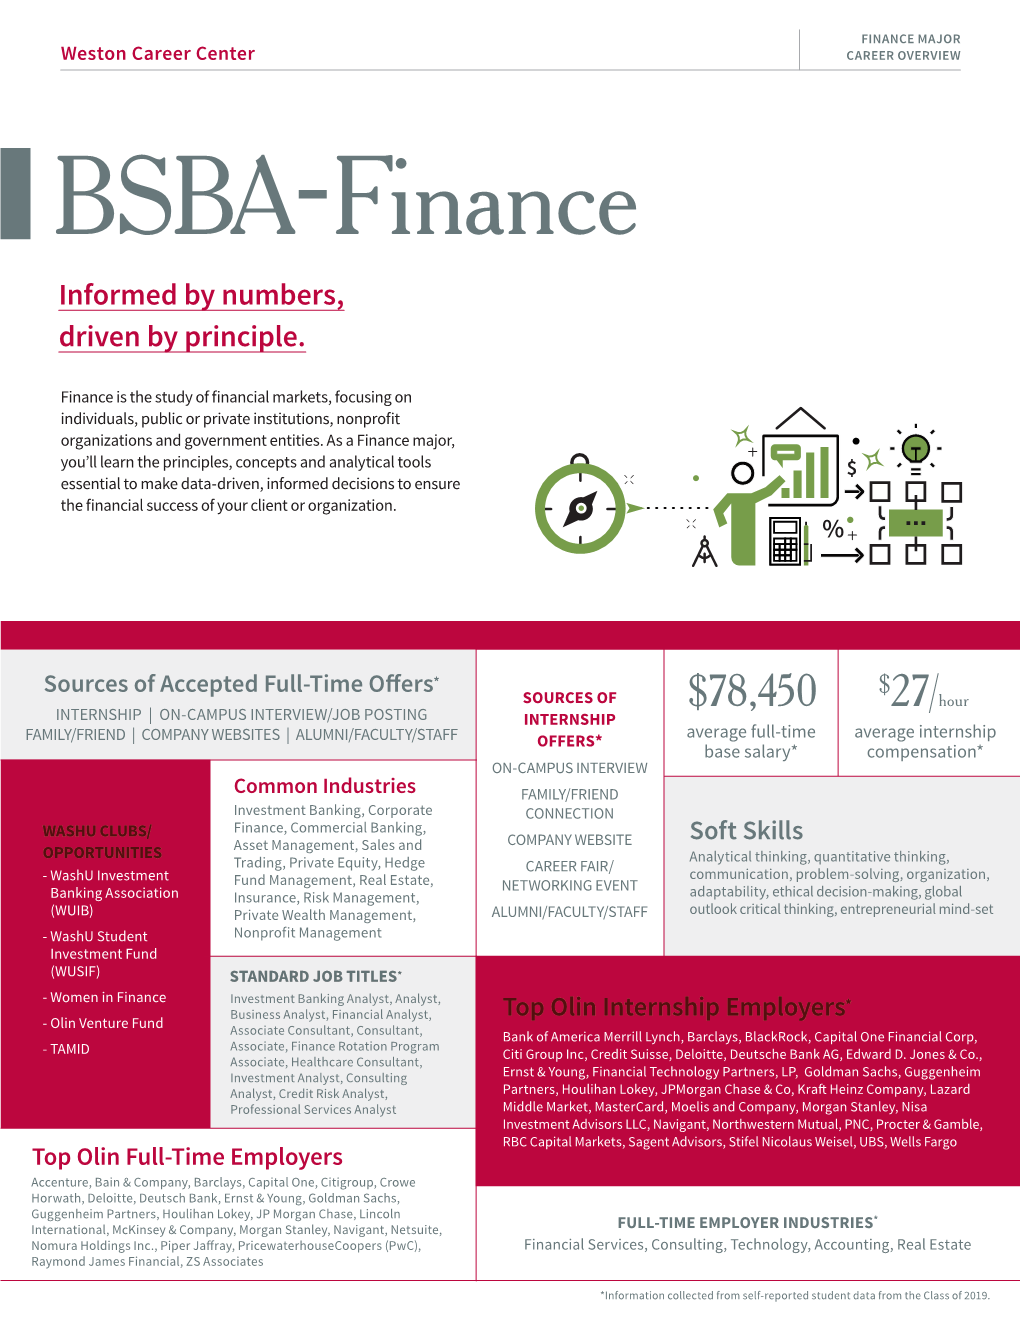 BSBA Finance Informed by Numbers, Driven by Principle